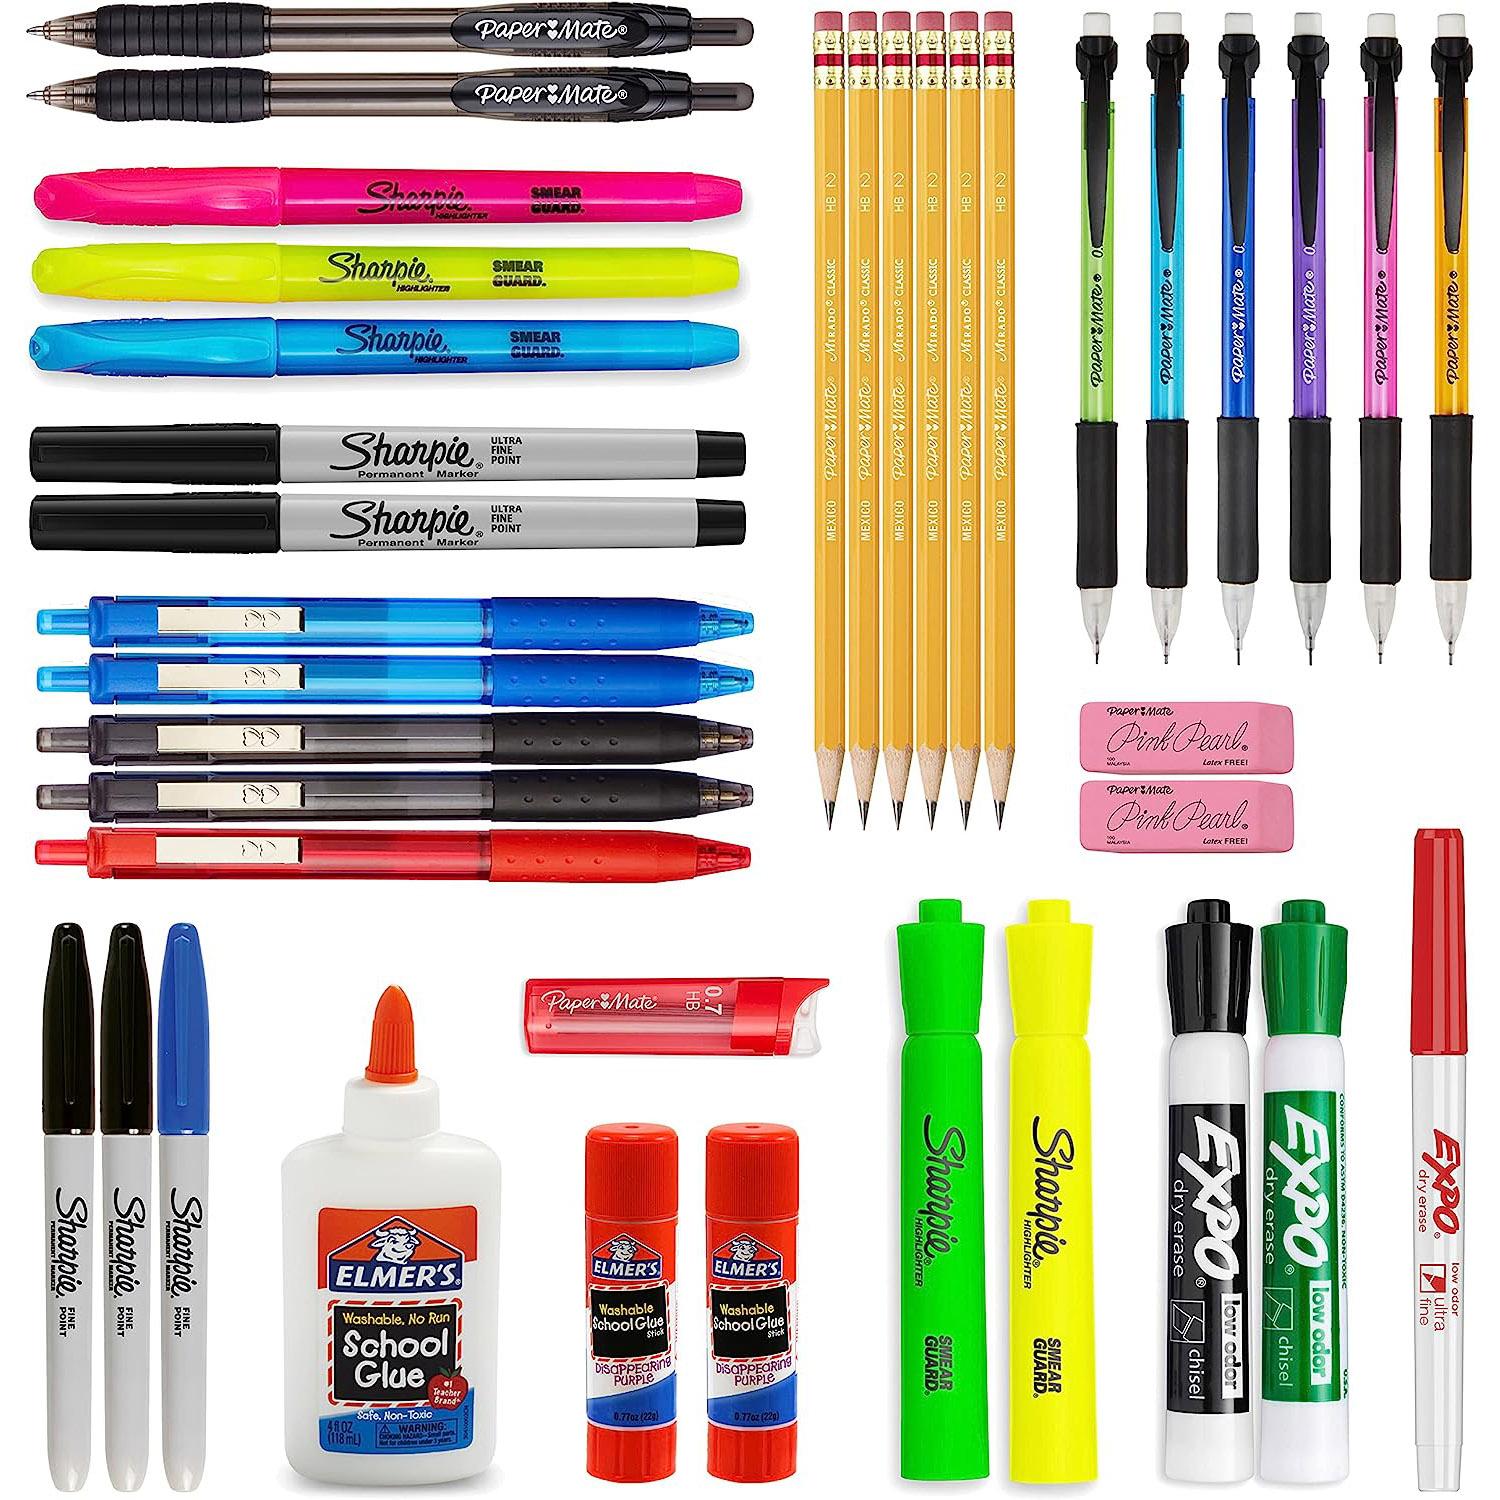 School Supplies Variety Pack for $8.34 Shipped